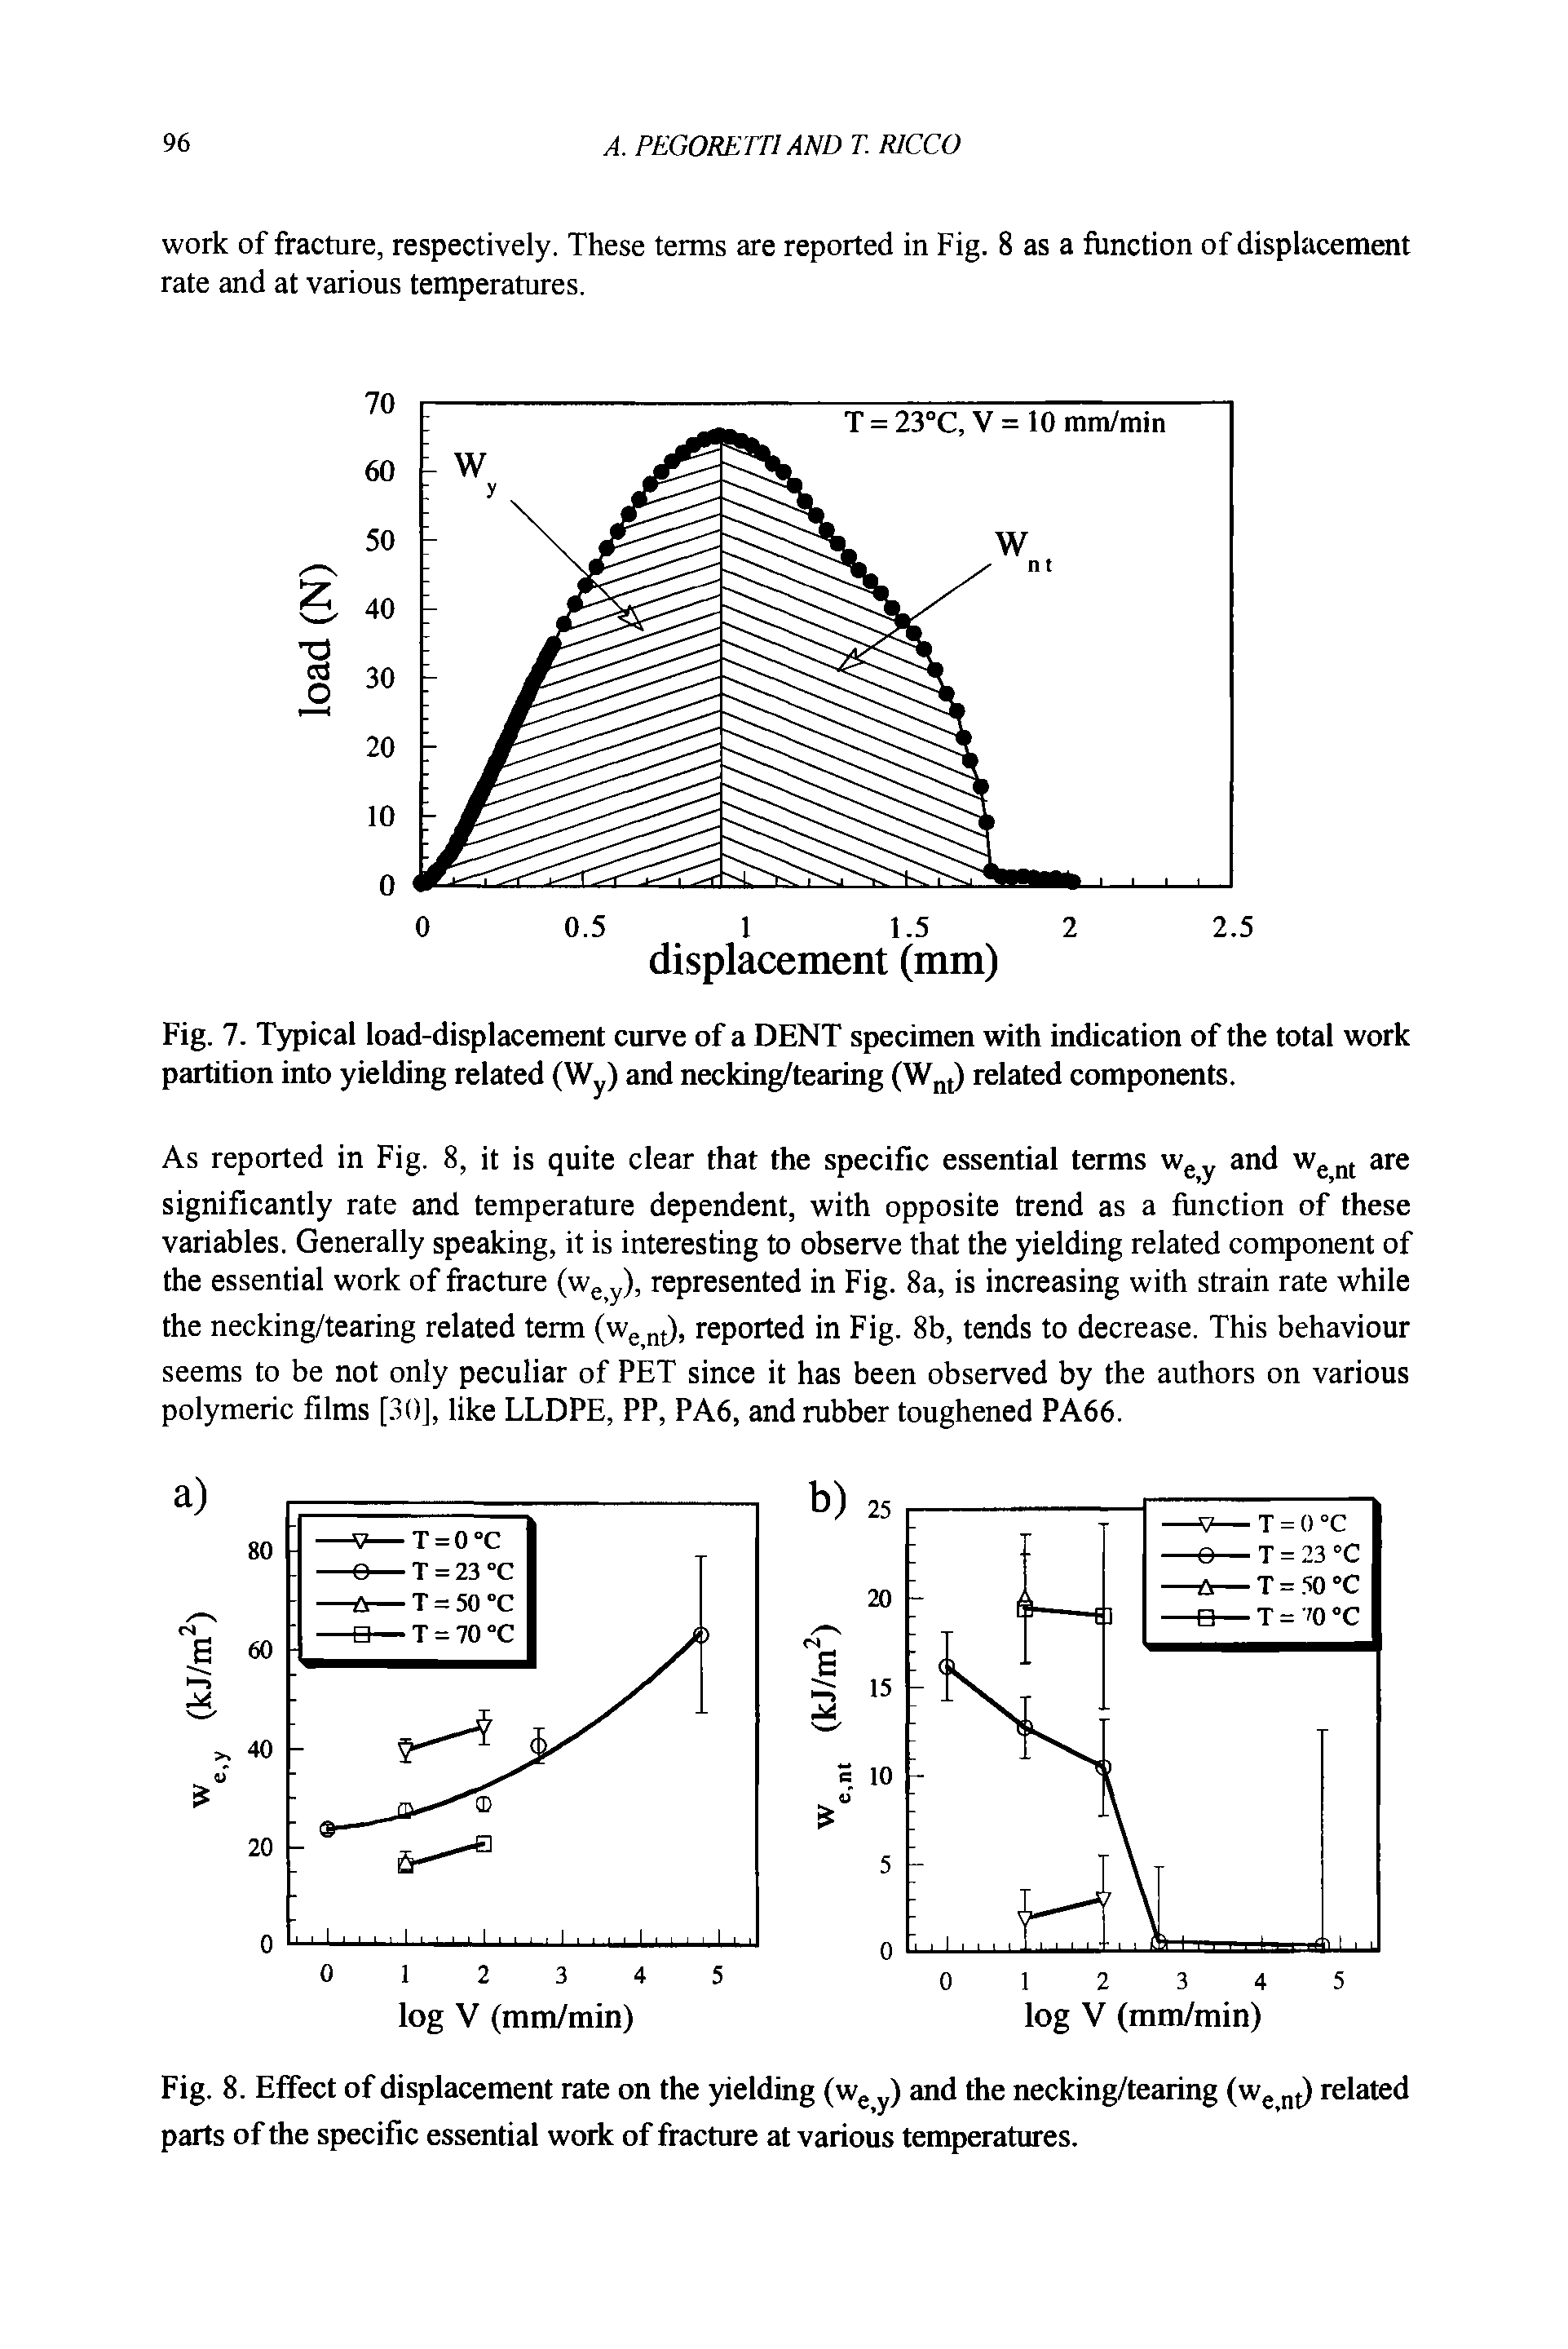 Fig. 8. Effect of displacement rate on the yielding (Wg y) and the necking/tearing (Wg related parts of the specific essential work of fracture at various temperatures.